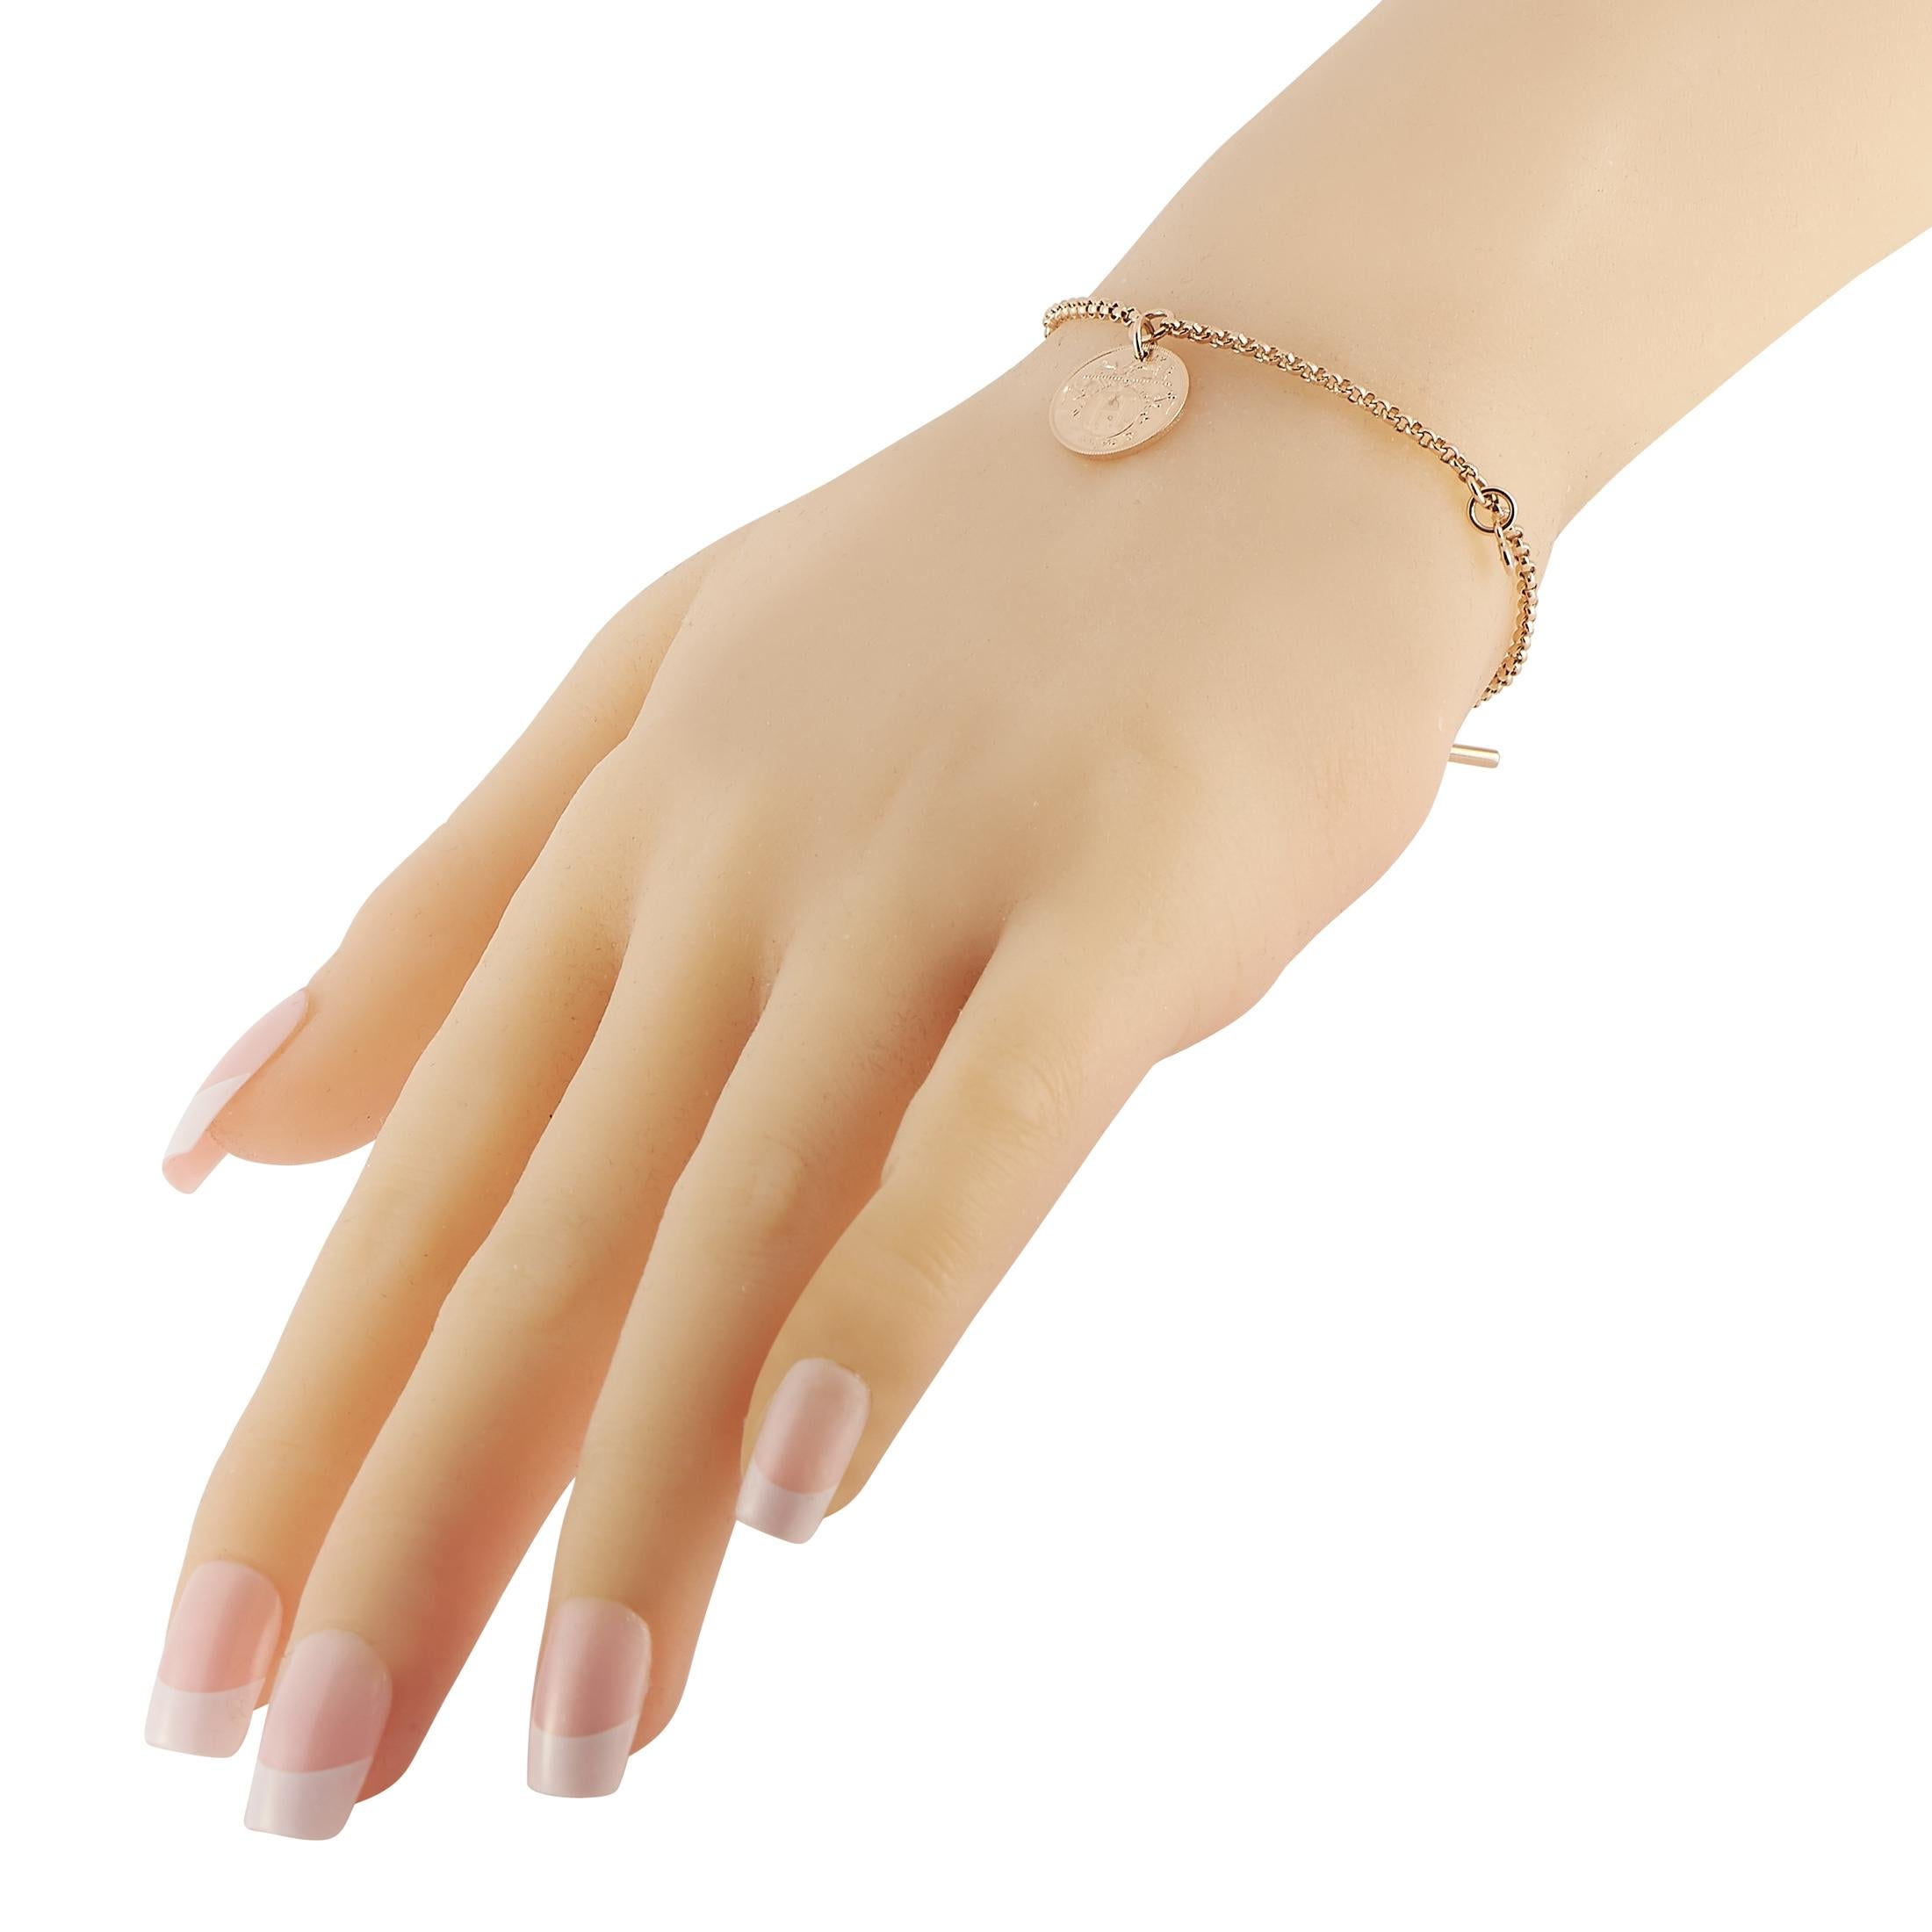 This 18K Rose Gold Hermes Ex-Libris bracelet is an elevated take on a classic charm bracelet. Circular charms adorned with the iconic Ex-Libris motif make this delicate design come to life. It measures 6.5” long and includes toggle clasp closure. 
